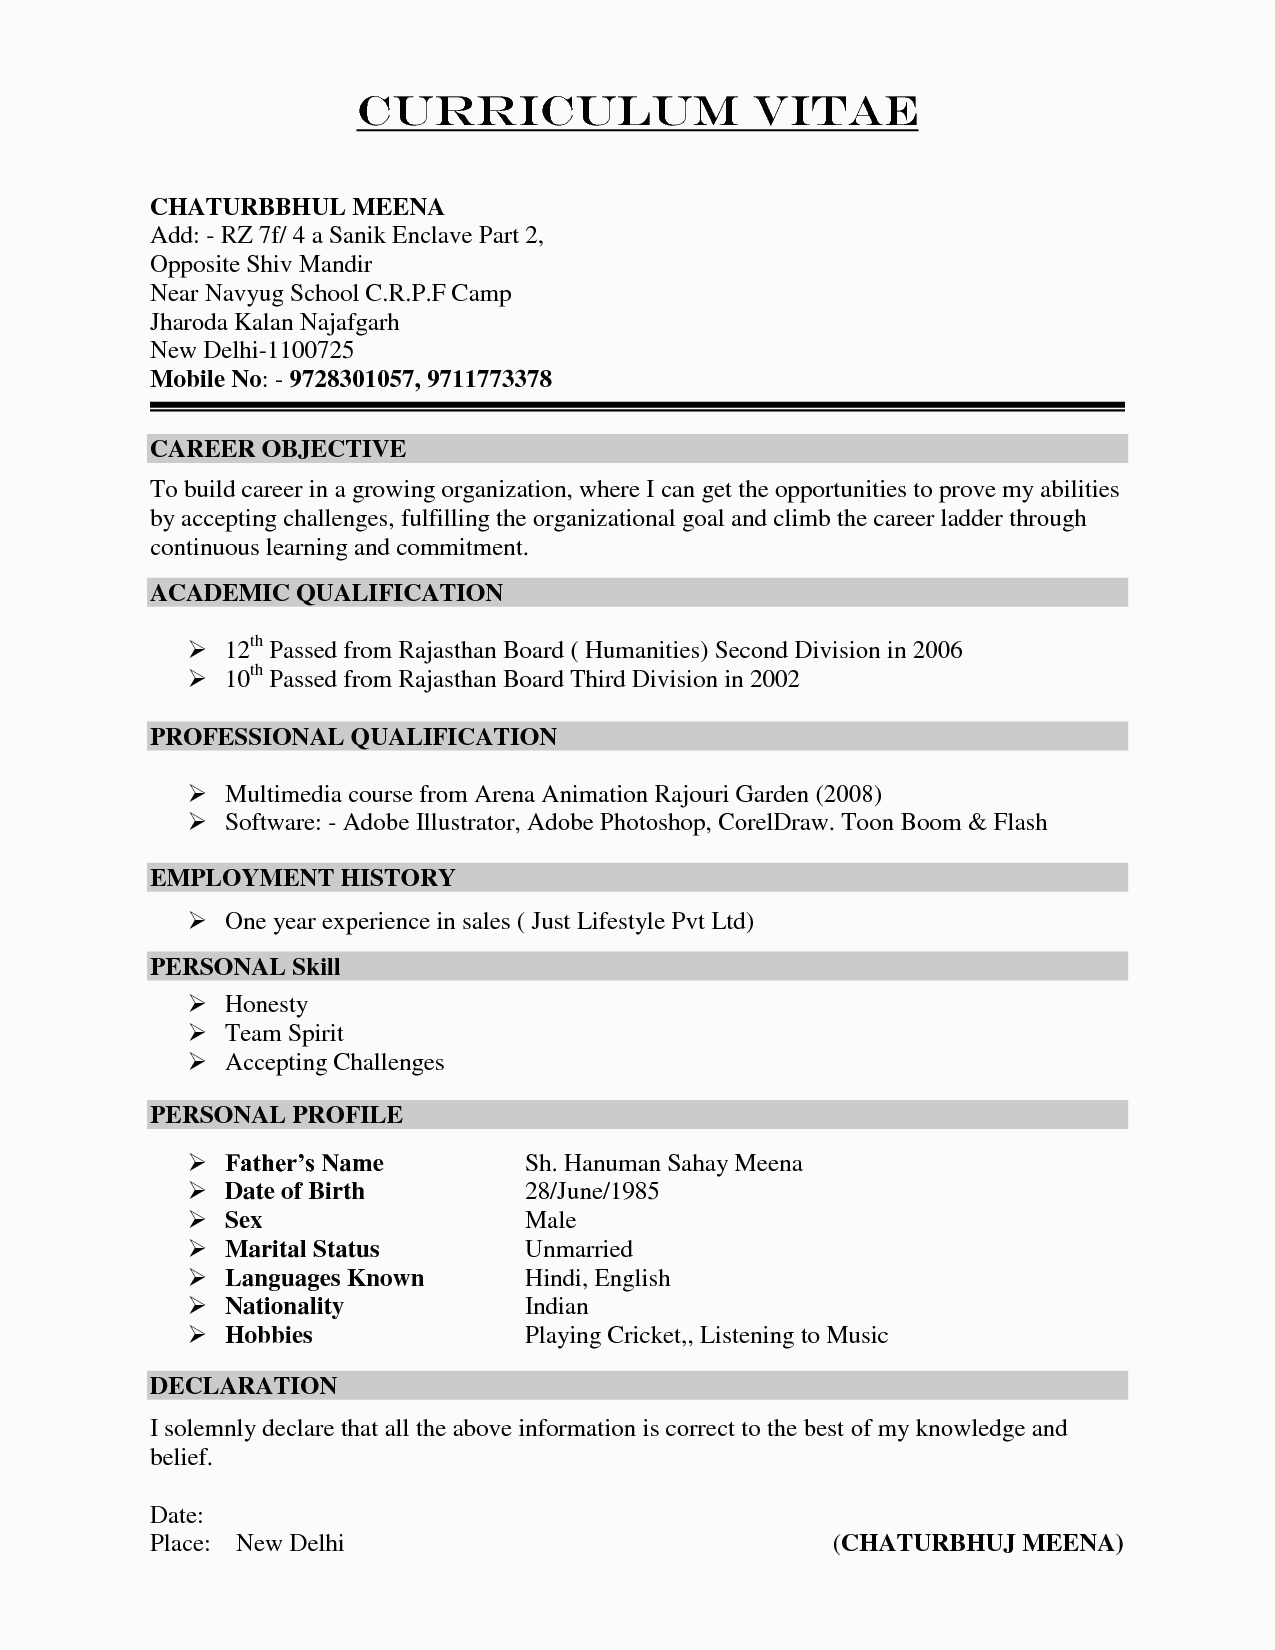 Sample Hobbies and Interests for Resume Resume Examples Hobbies Resume Templates